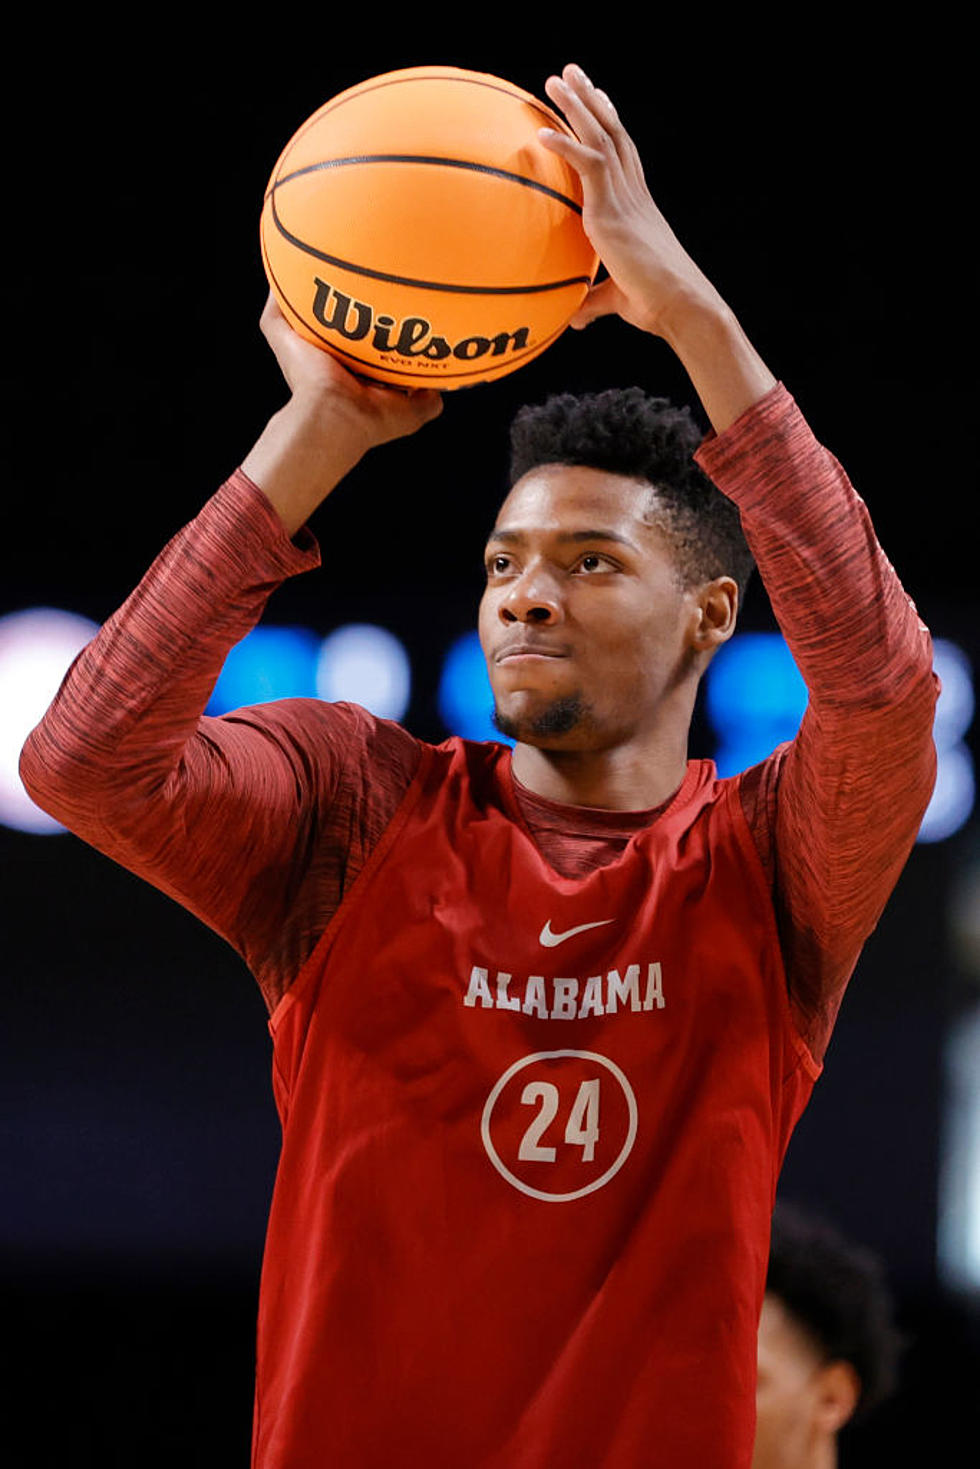 Did Oversized Balls Lead To Alabama’s Tourney Loss In Louisville?